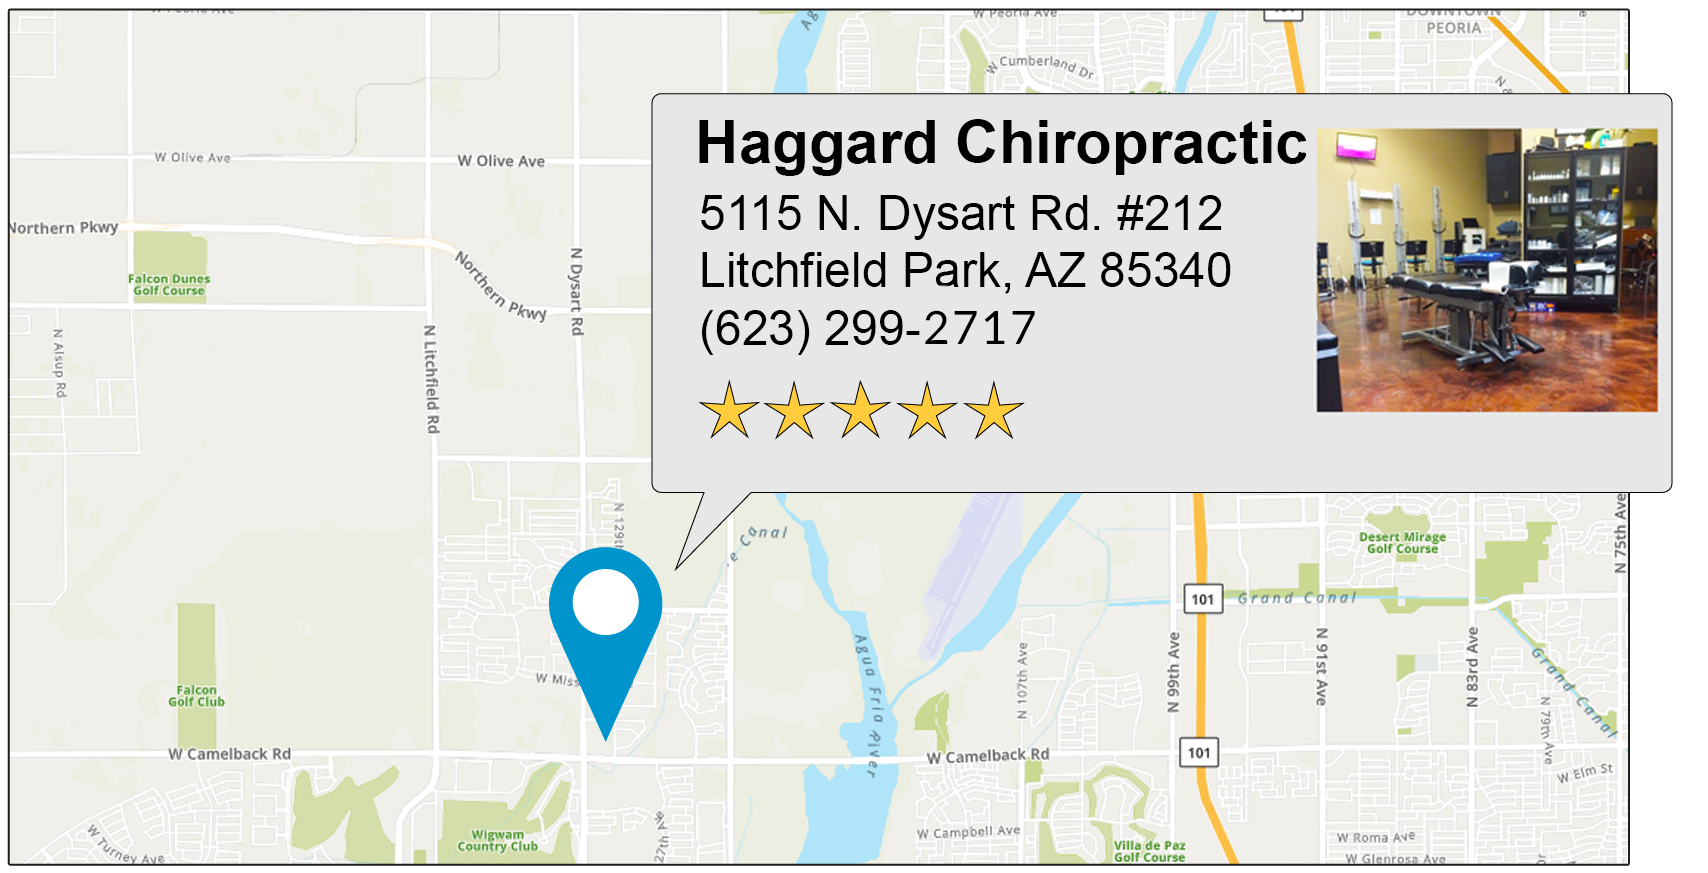 Haggard Chiropractic's Litchfield Park office location on google map